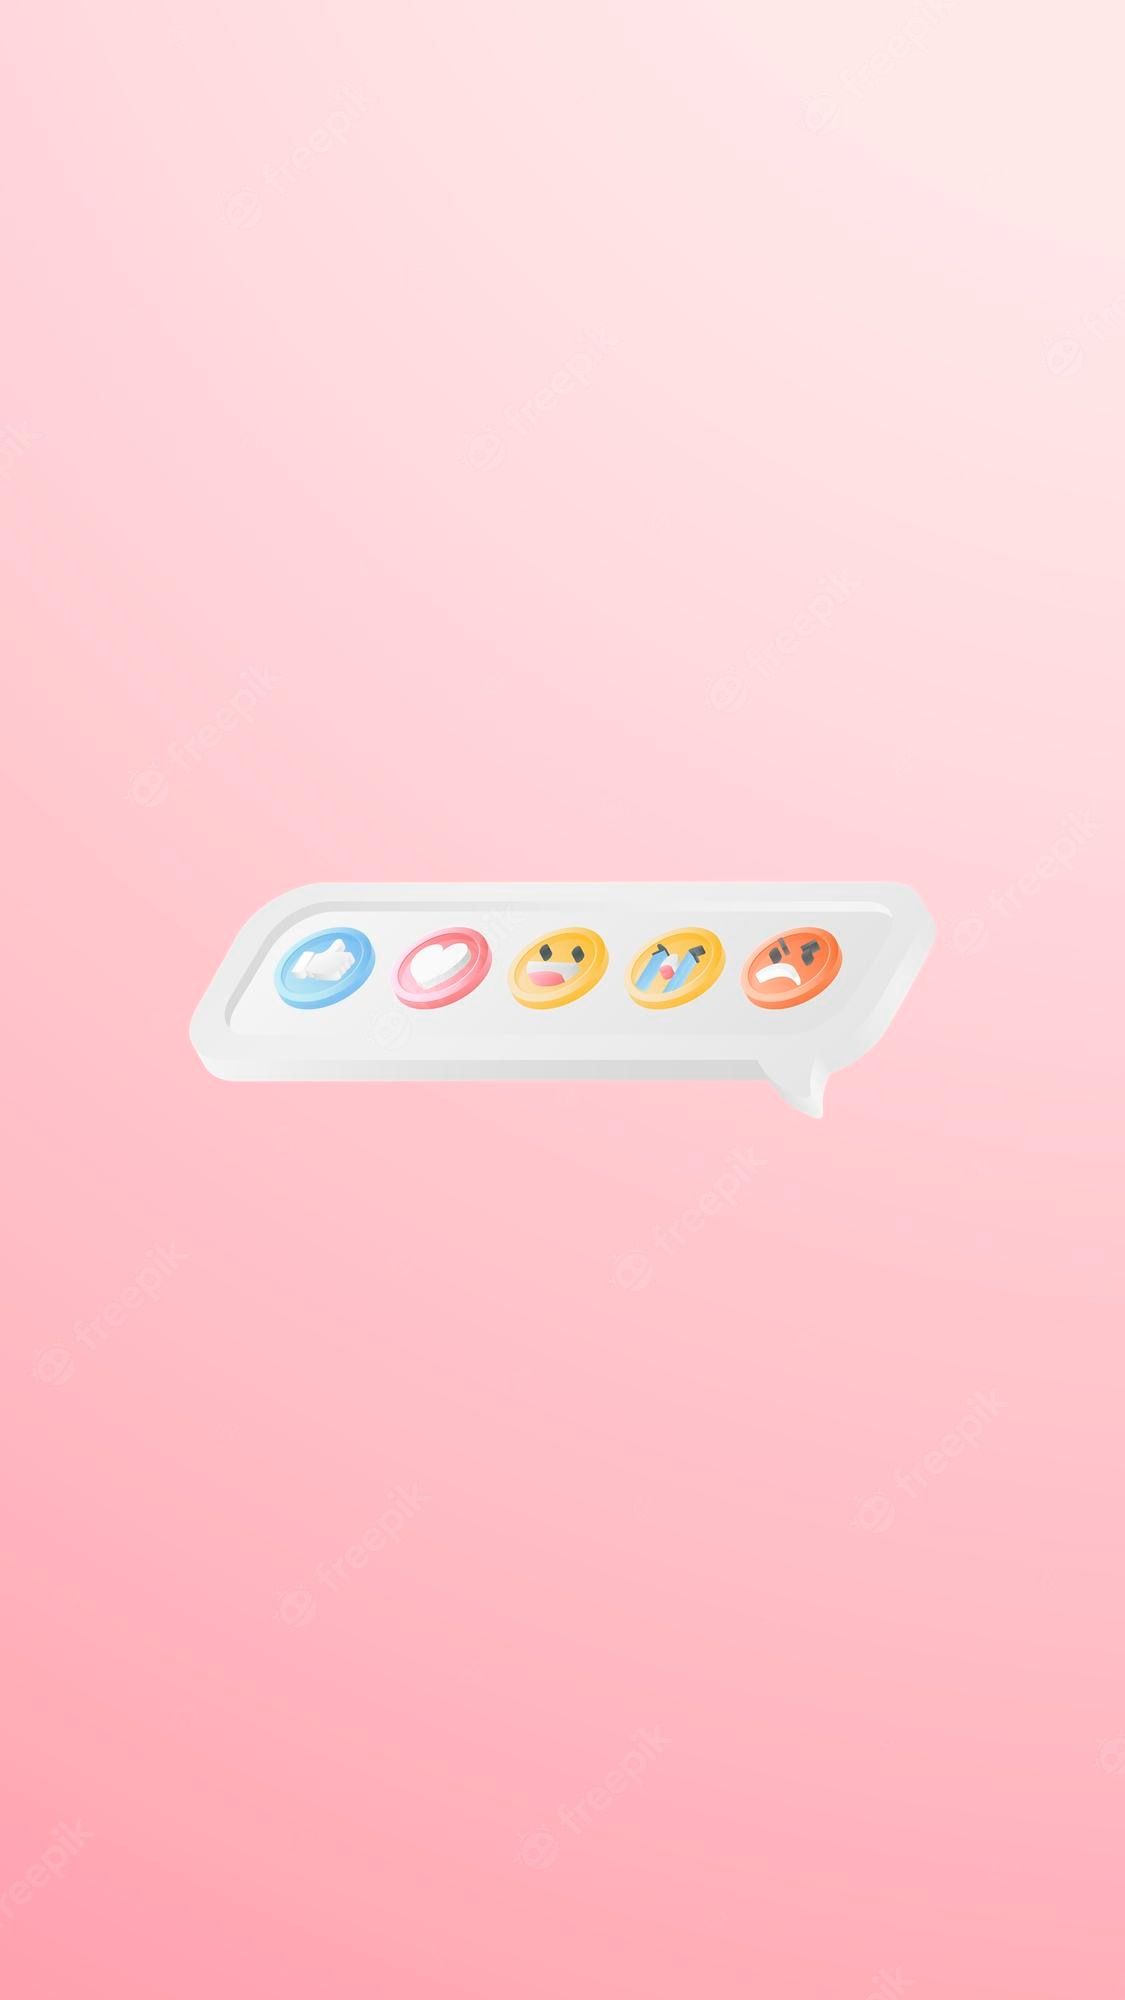 A white speech bubble with four different emojis on a pink background - Emoji